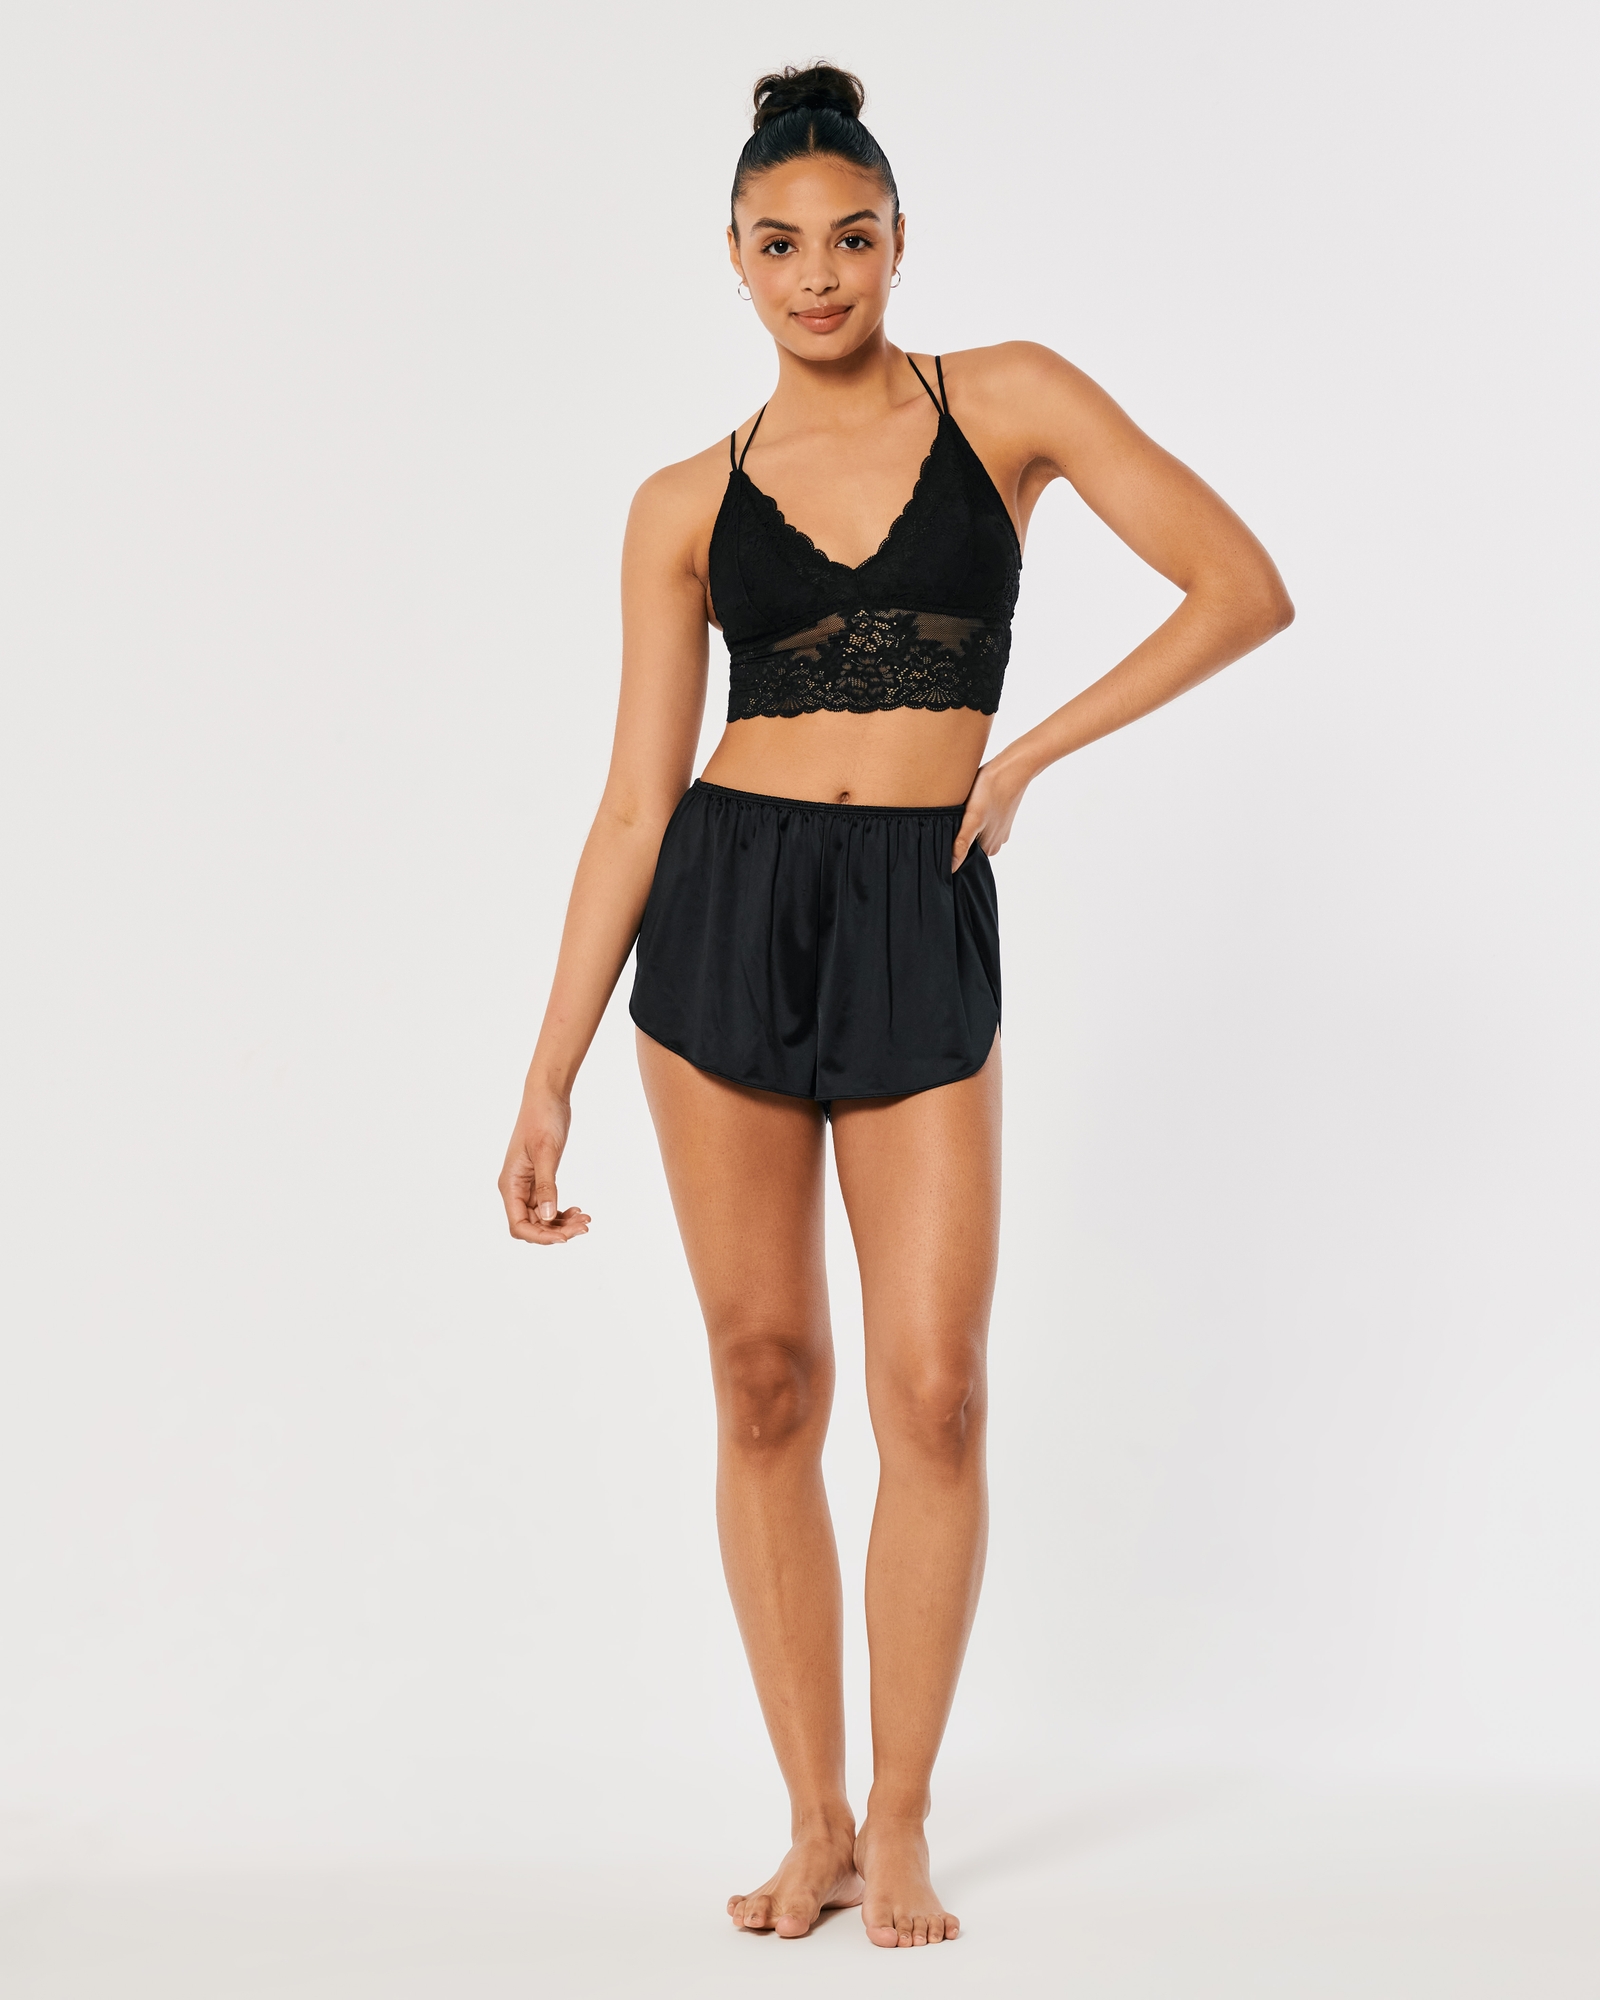 https://img.hollisterco.com/is/image/anf/KIC_510-3000-0091-940_model1.jpg?policy=product-extra-large